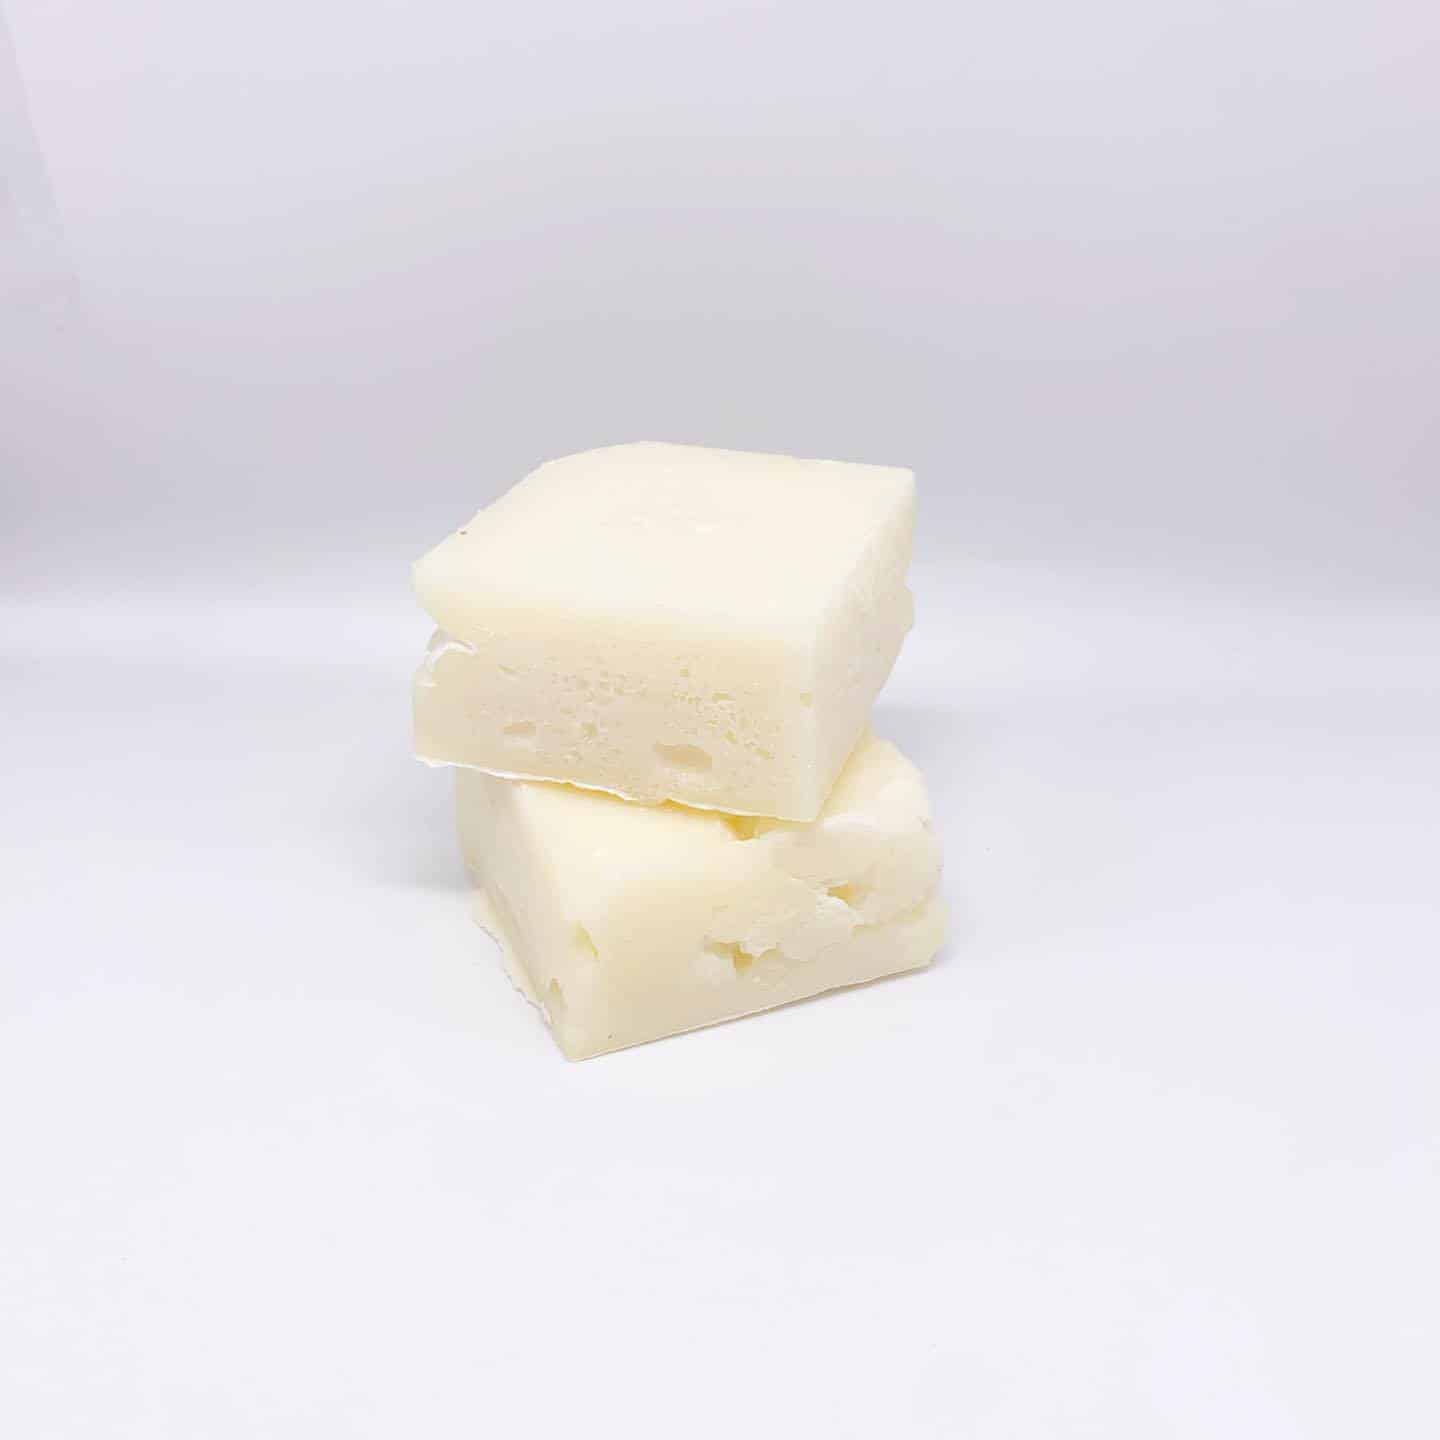 This Cleaning Soap bar is made with love by Sudzy Bums! Shop more unique gift ideas today with Spots Initiatives, the best way to support creators.